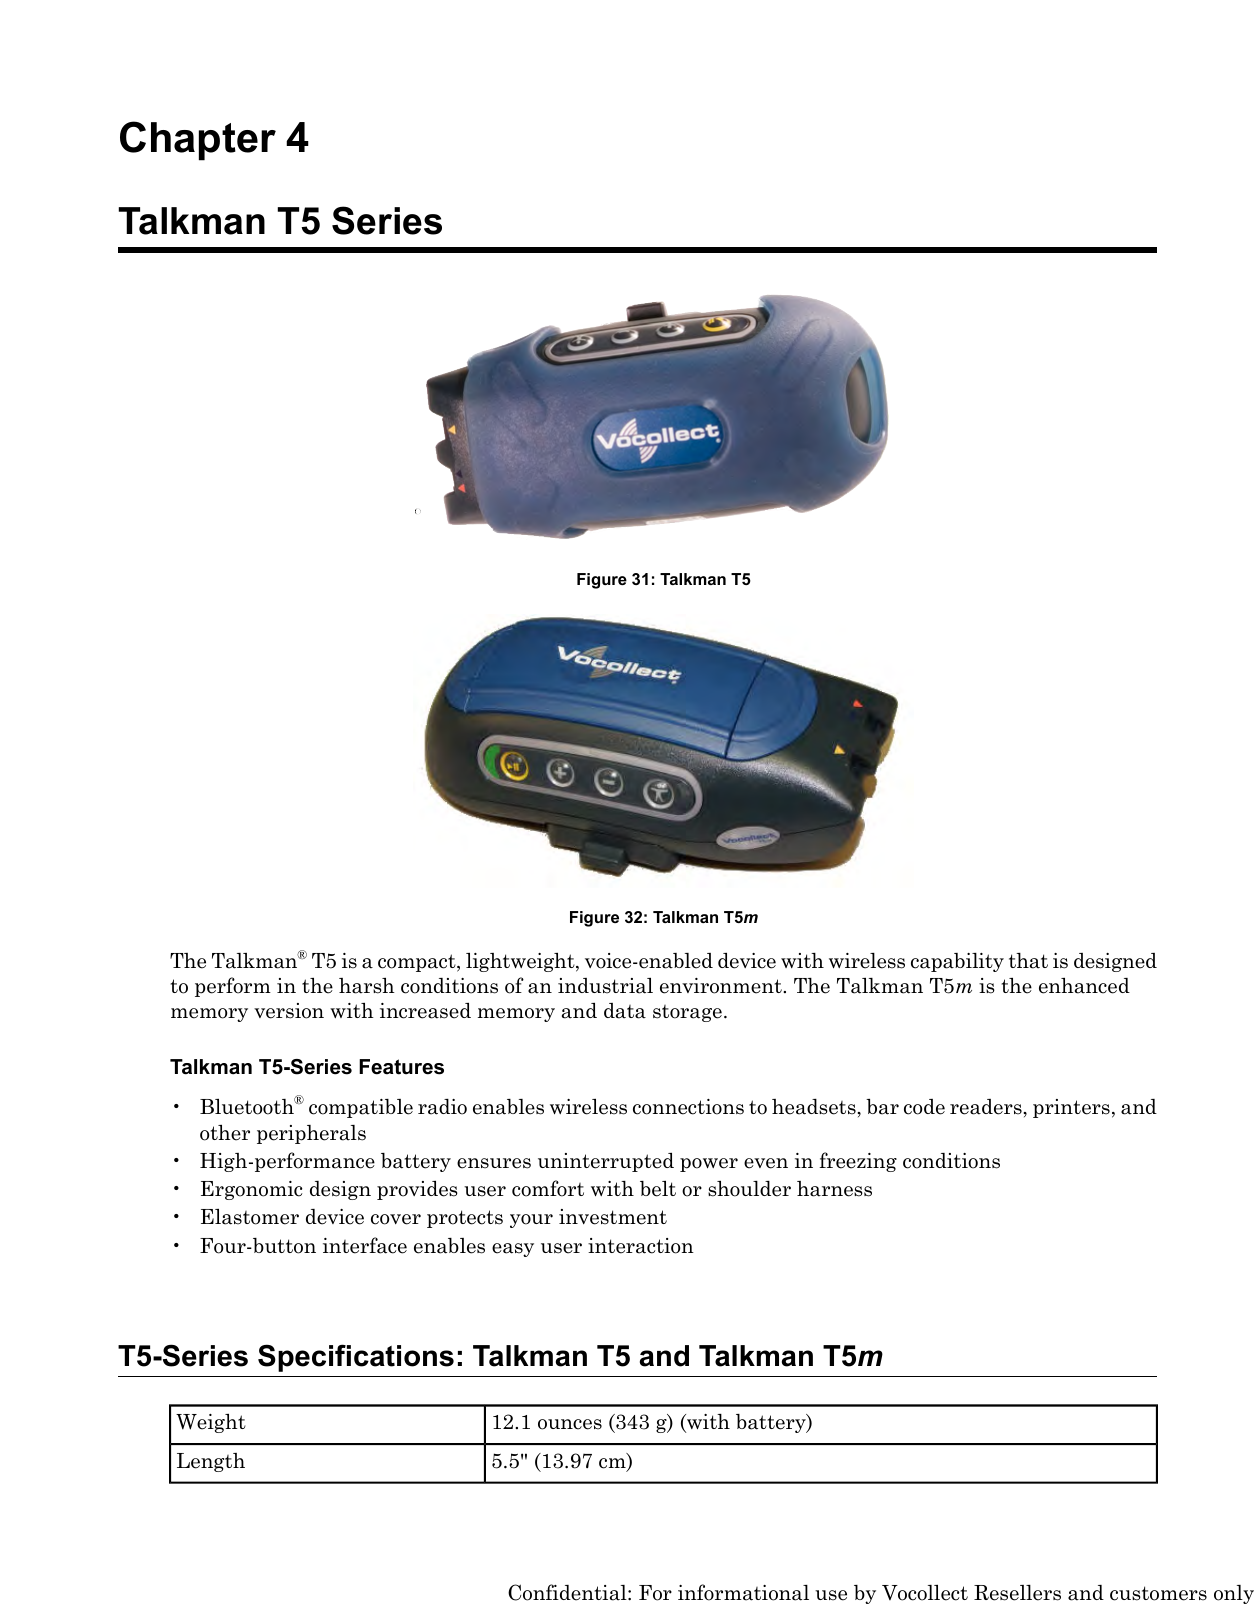 Chapter 4Talkman T5 SeriesFigure 31: Talkman T5Figure 32: Talkman T5mThe Talkman®T5 is a compact, lightweight, voice-enabled device with wireless capability that is designedto perform in the harsh conditions of an industrial environment. The Talkman T5mis the enhancedmemory version with increased memory and data storage.Talkman T5-Series Features• Bluetooth®compatible radio enables wireless connections to headsets, bar code readers, printers, andother peripherals• High-performance battery ensures uninterrupted power even in freezing conditions• Ergonomic design provides user comfort with belt or shoulder harness• Elastomer device cover protects your investment• Four-button interface enables easy user interactionT5-Series Specifications: Talkman T5 and Talkman T5m12.1 ounces (343 g) (with battery)Weight5.5&quot; (13.97 cm)LengthConfidential: For informational use by Vocollect Resellers and customers only